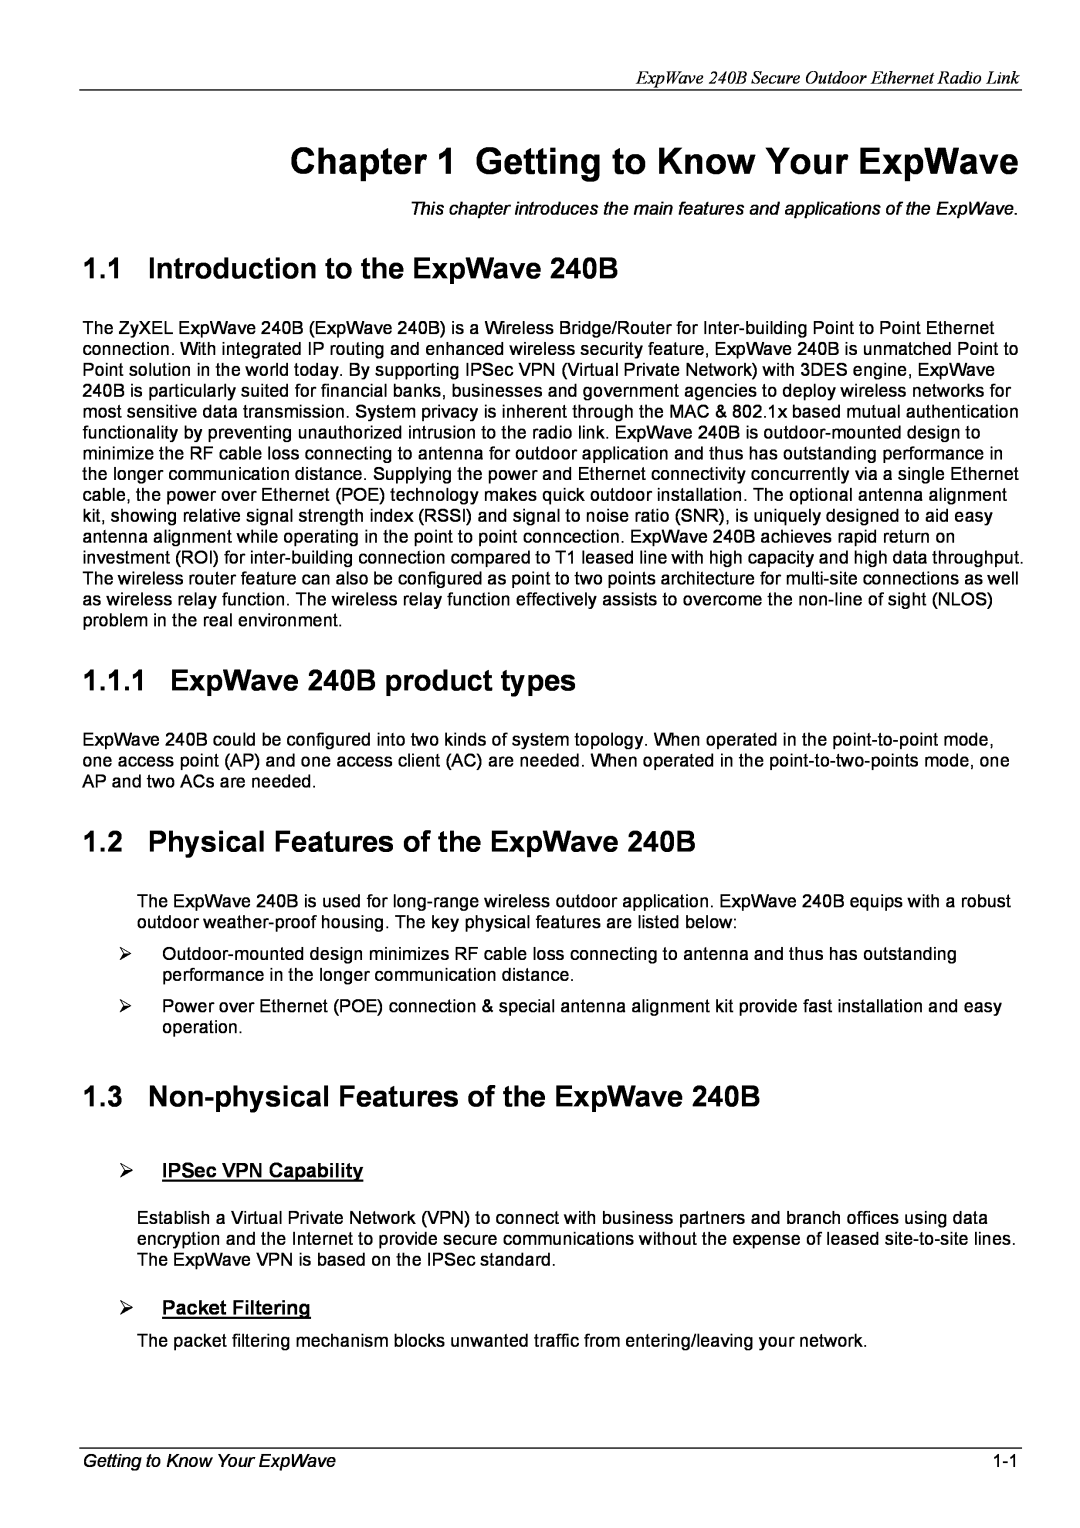 ZyXEL Communications manual Getting to Know Your ExpWave, Introduction to the ExpWave 240B, ExpWave 240B product types 